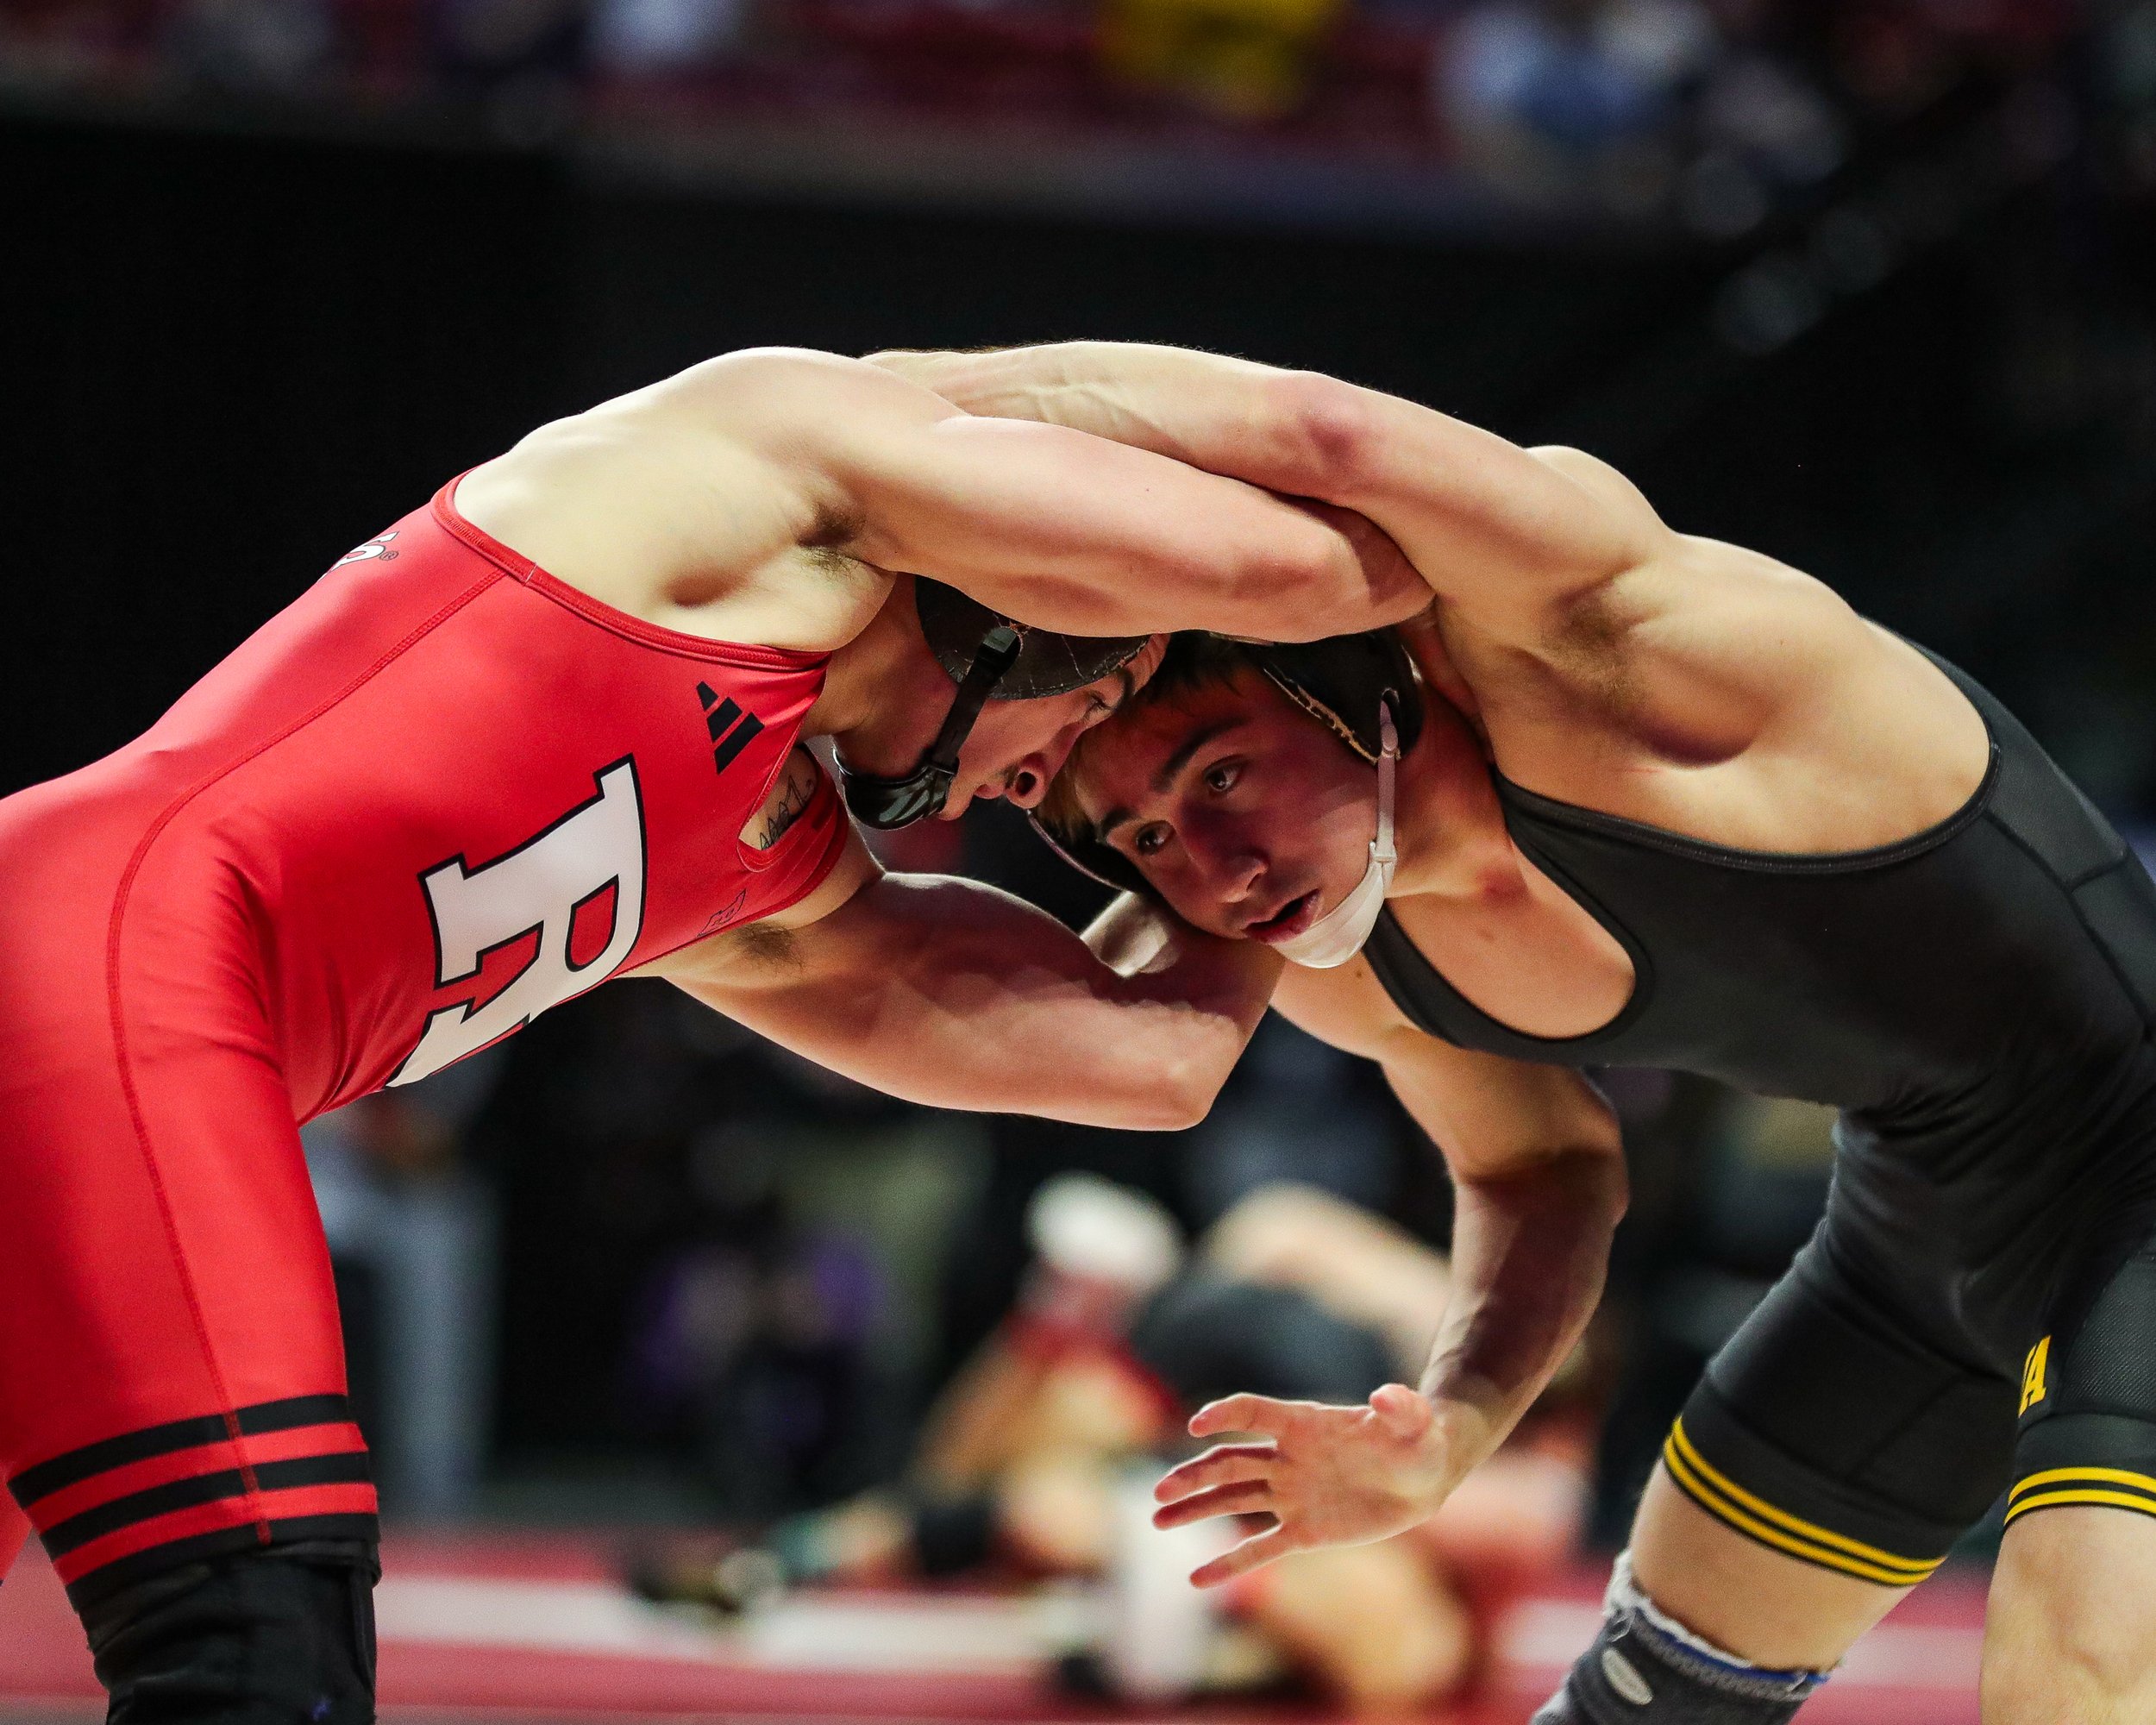  Iowa wrestler Drake Ayala grapples with Rutgers’ Dean Peterson in a 125-lb semifinal consolation match during the Big Ten Wrestling Championships at the Xfinity Center in College Park, Maryland on Sunday, March 10, 2023. Ayala won 4-1. (David Harman